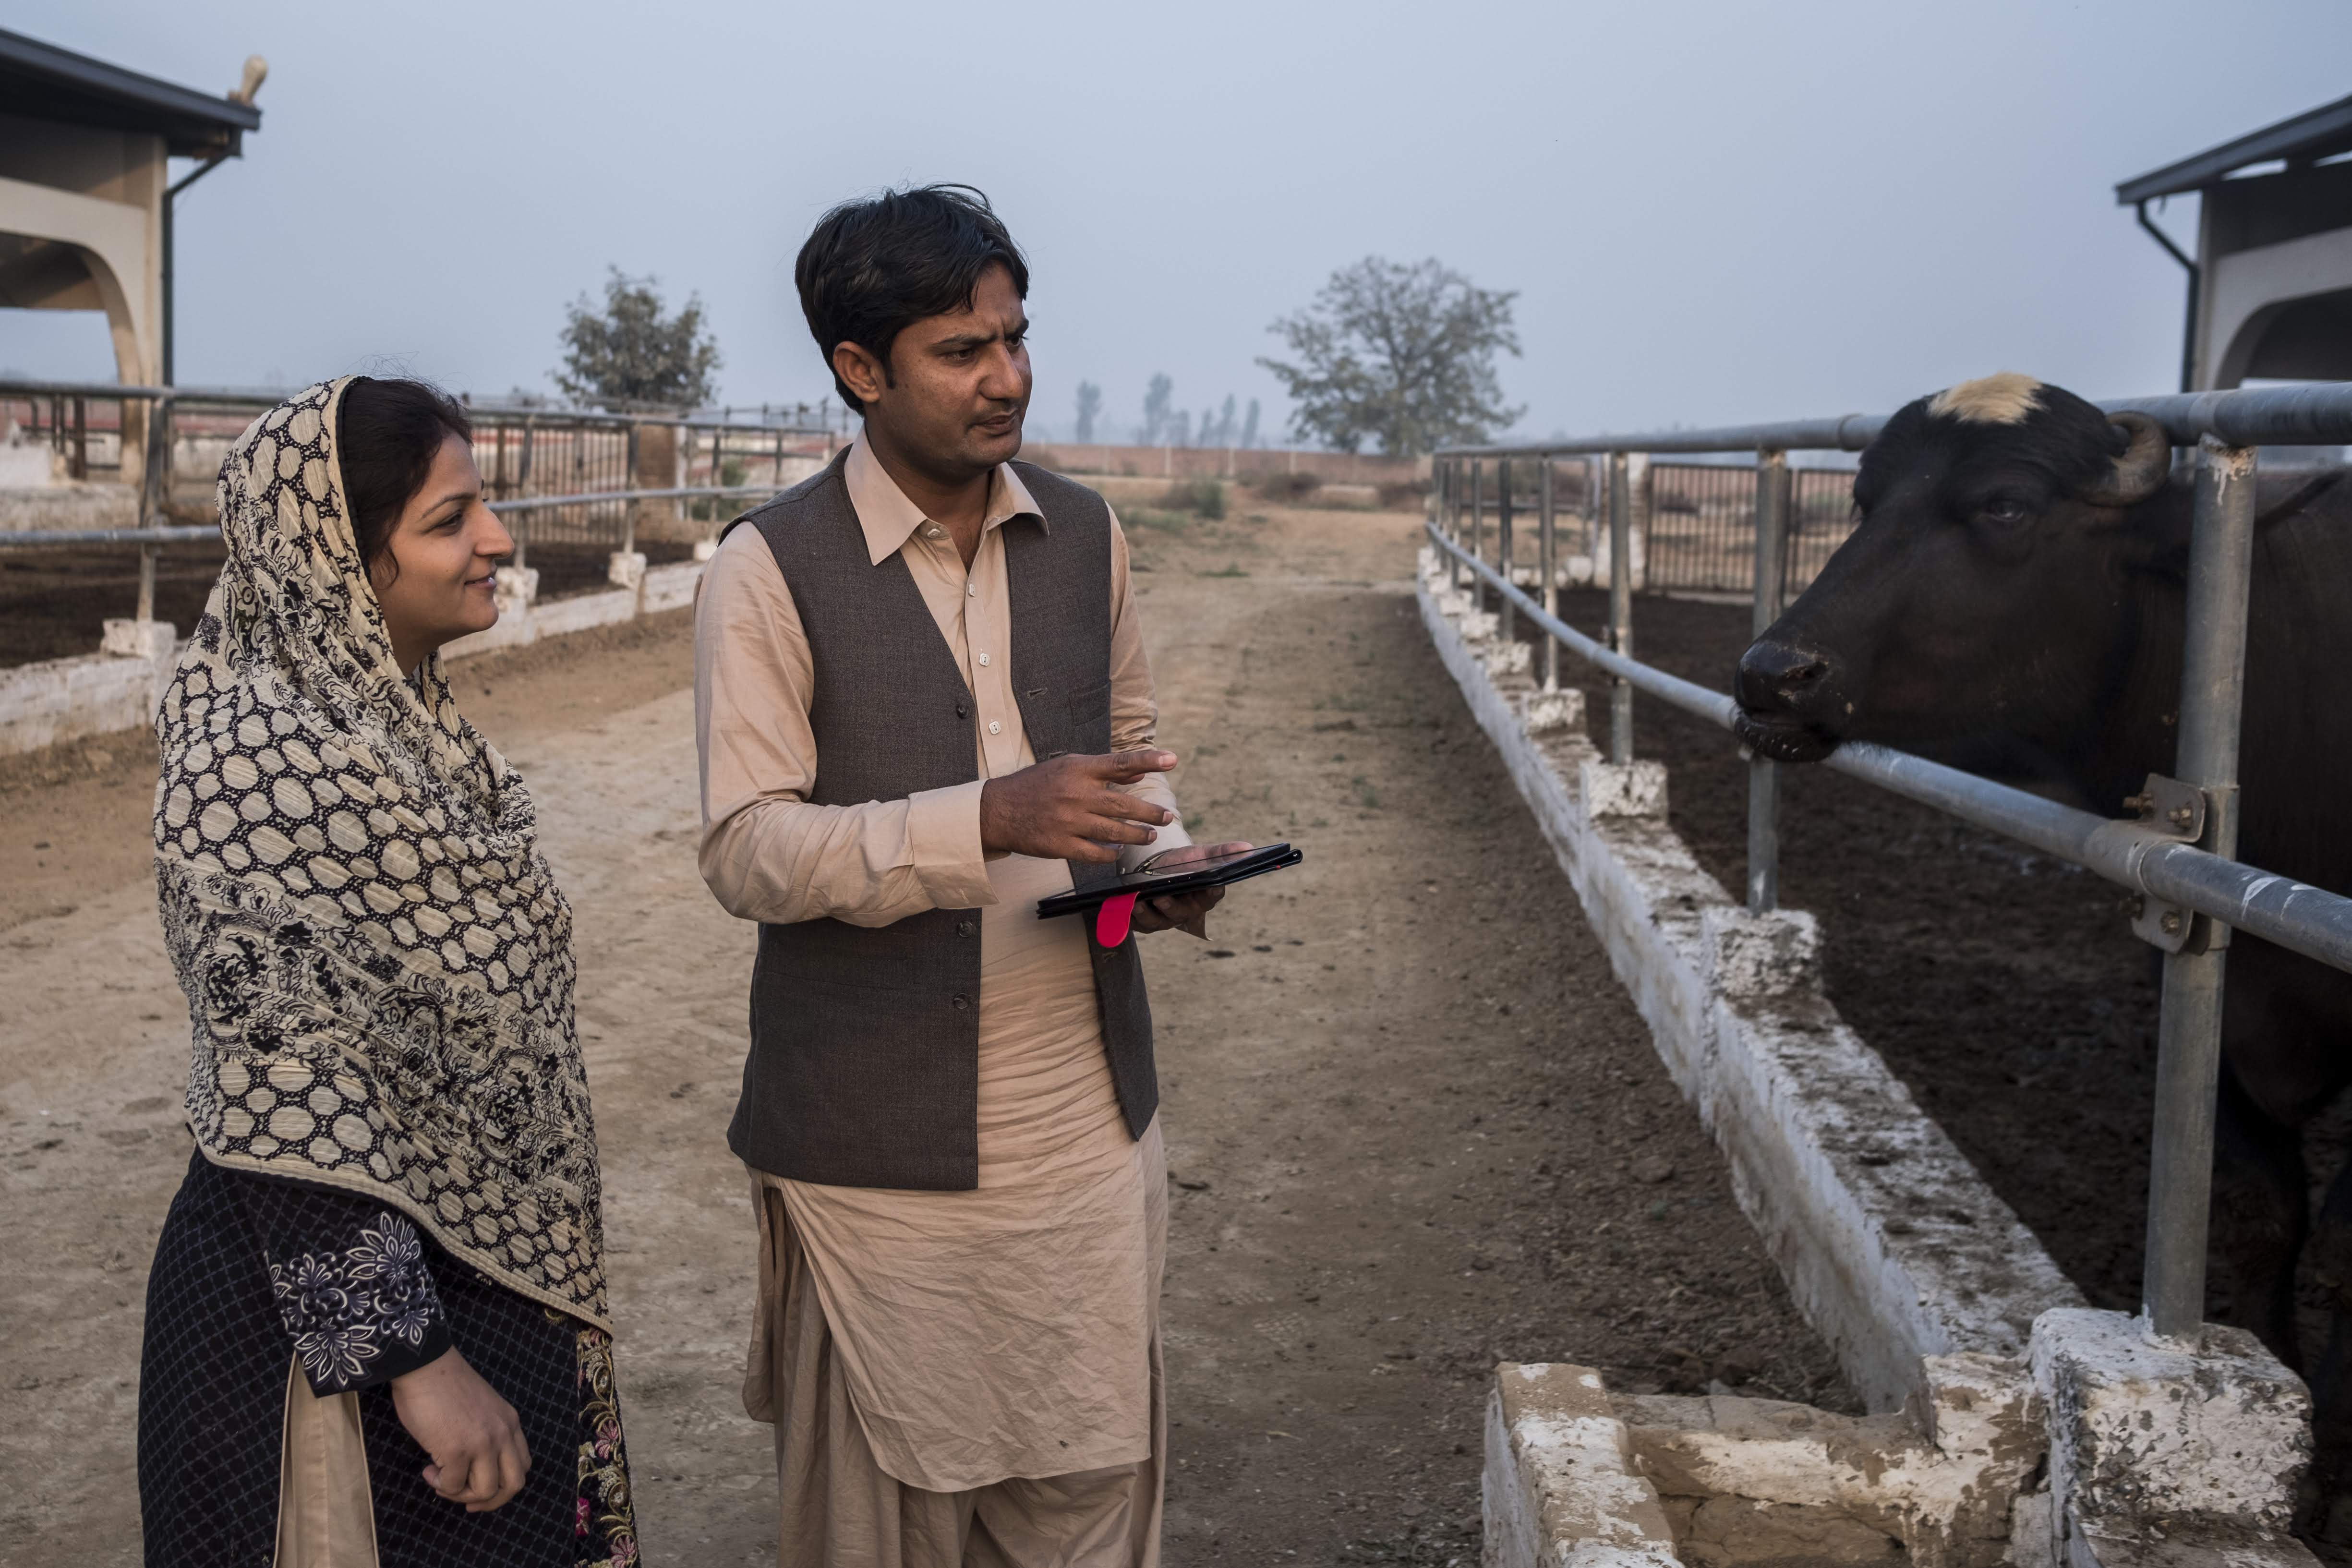 Sobia Majeed & Mohammad Aljaz demonstrate how the extension area advisors can use commcare surveys on a tablet. Sobia Majeed & Mohammad Aljaz  are both extension area advisors  based in Sindh Province of Pakistan.